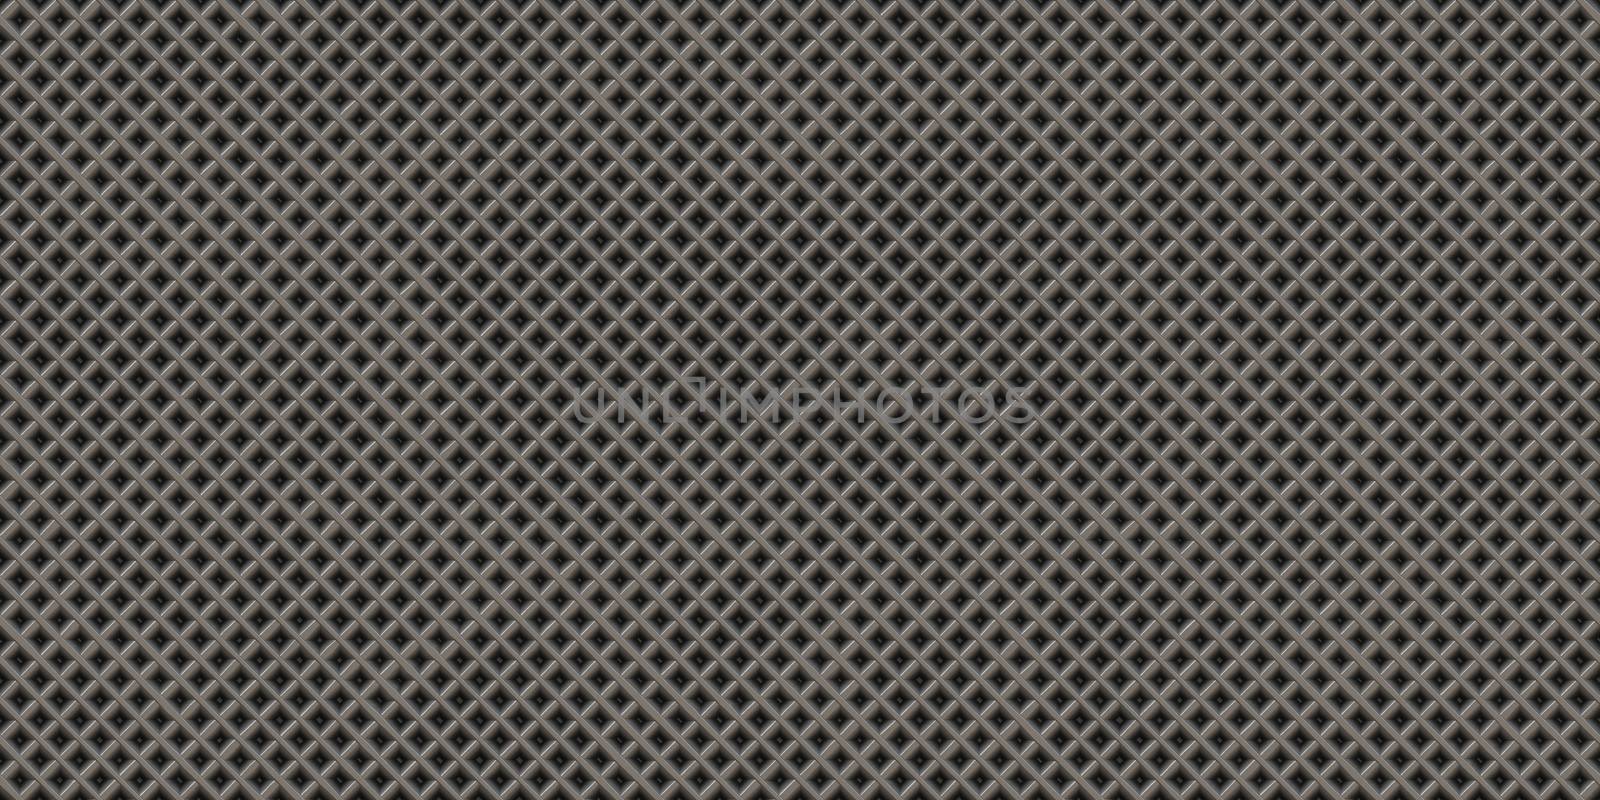 Metal rhombus pattern surface. Knurling touch texture. Knurl contact surface background. by sanches812